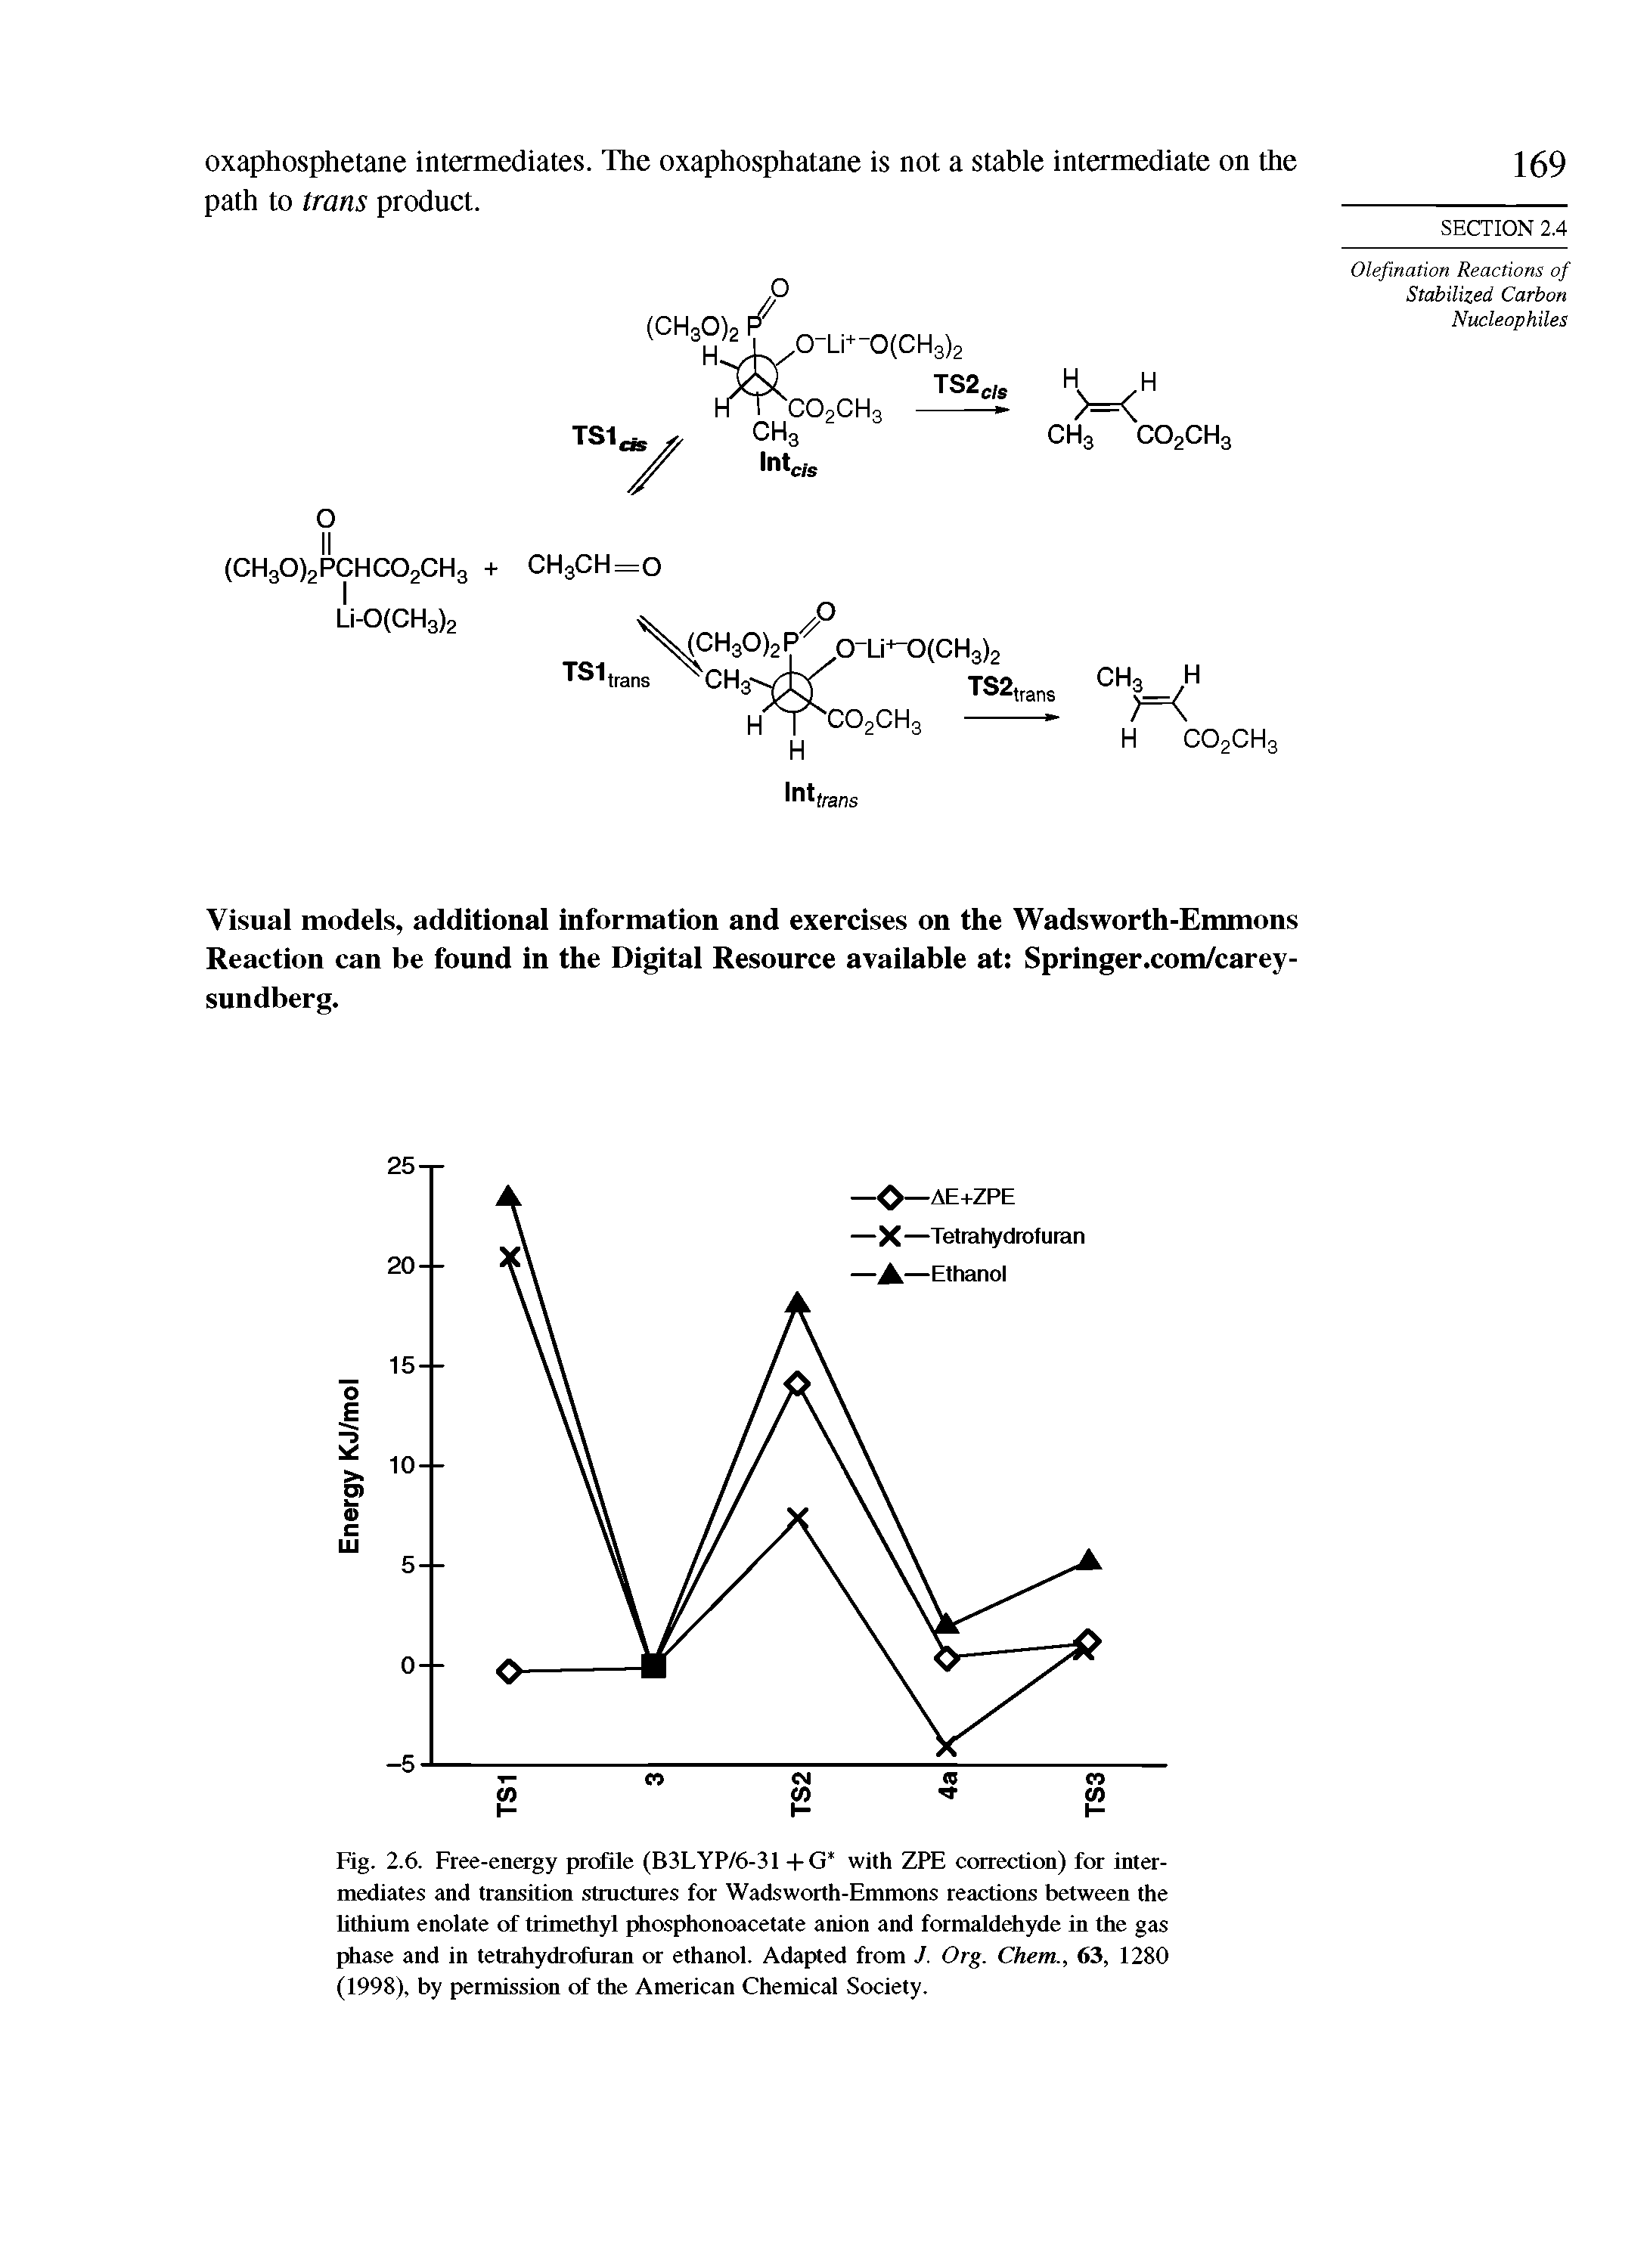 Fig. 2.6. Free-energy profile (B3LYP/6-31 + G with ZPE correction) for intermediates and transition structures for Wadsworth-Emmons reactions between the lithium enolate of trimethyl phosphonoacetate anion and formaldehyde in the gas phase and in tetrahydrofuran or ethanol. Adapted from J. Org. Chem., 63, 1280 (1998), by permission of the American Chemical Society.